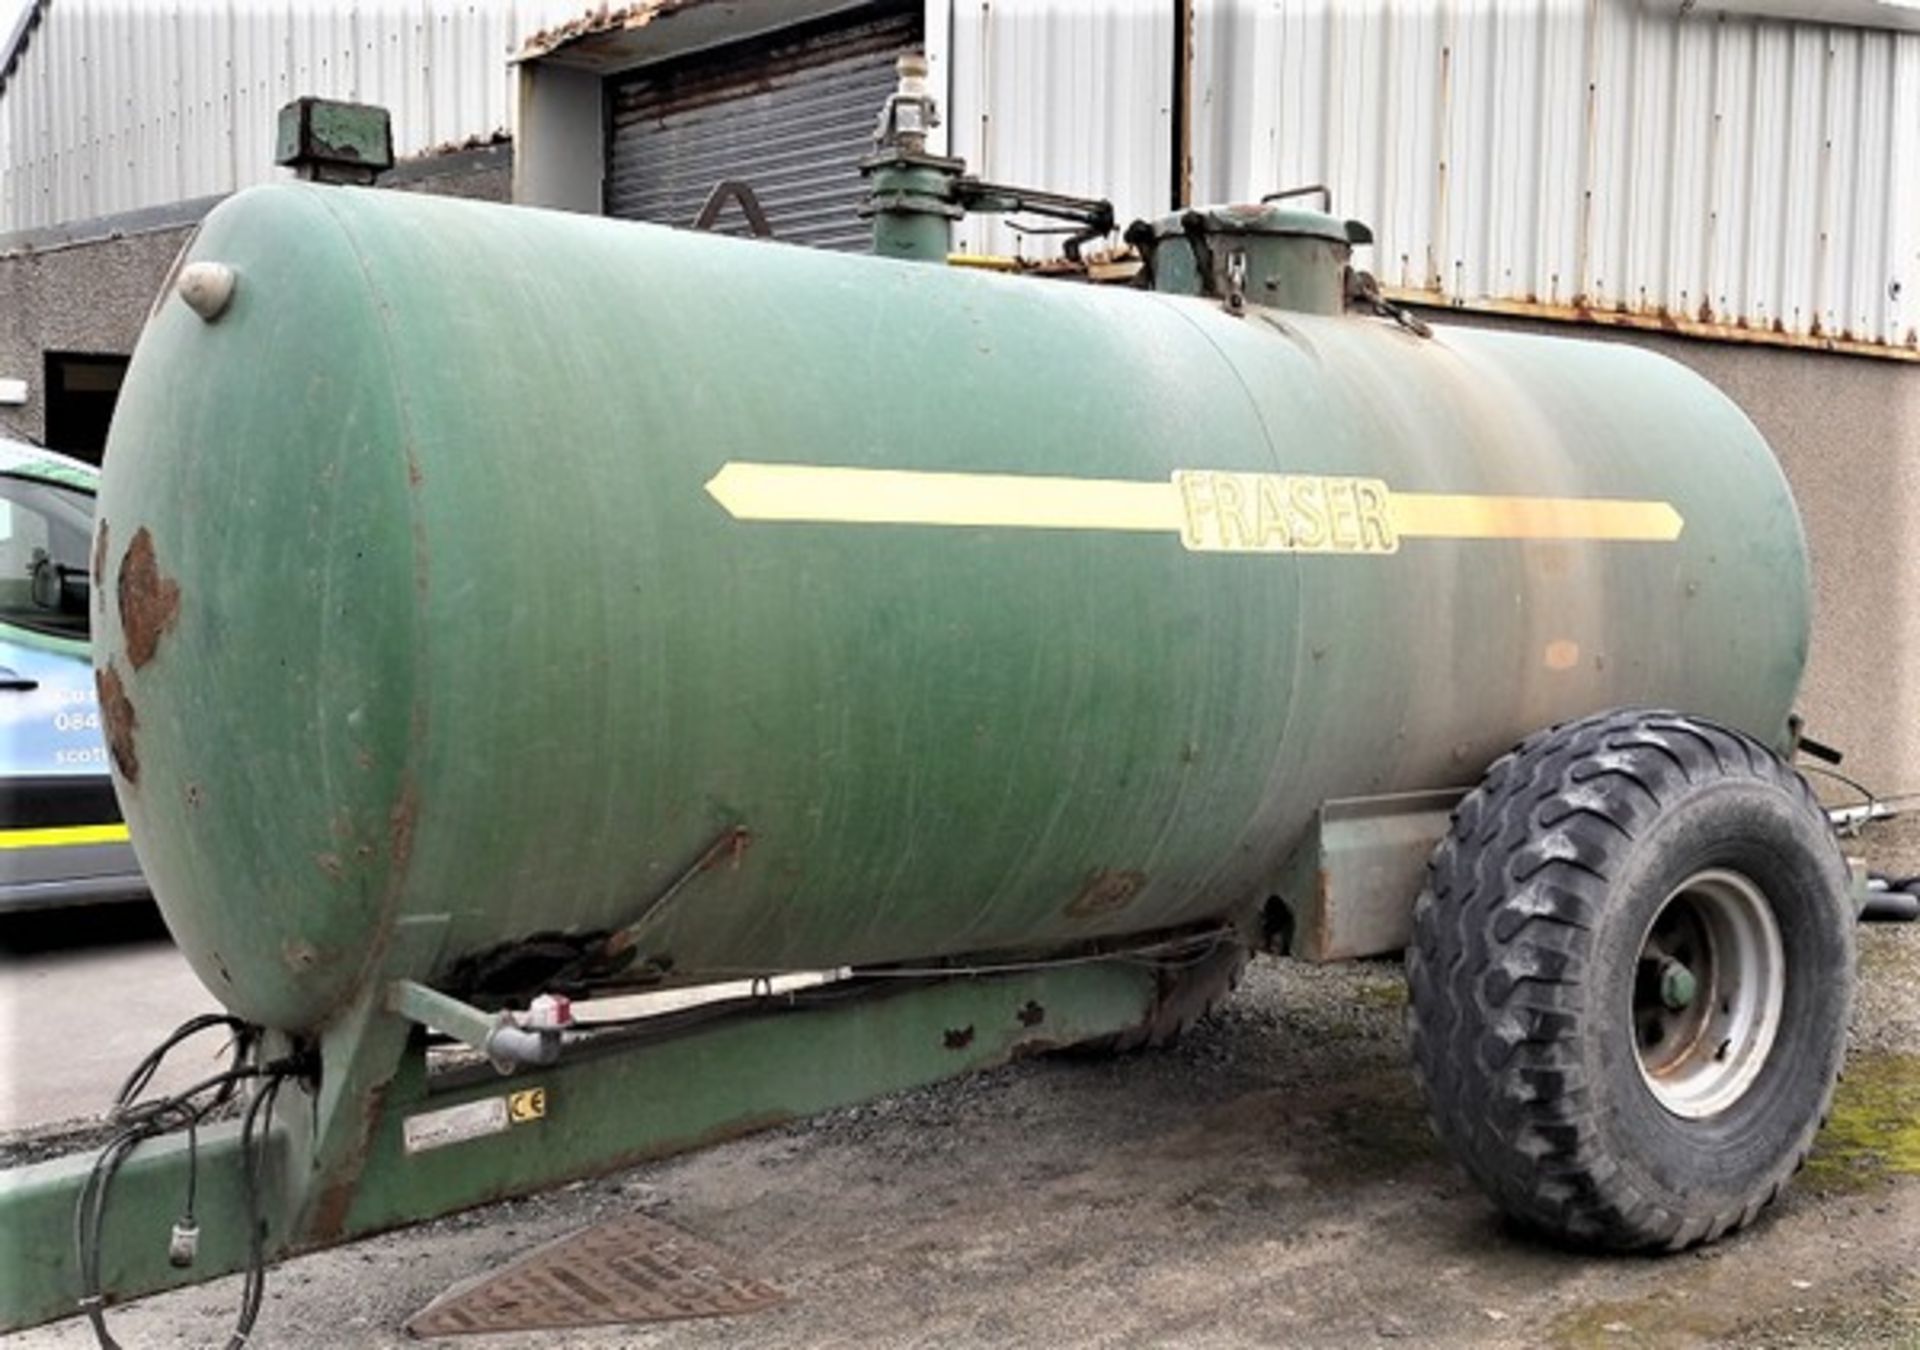 1994 FRASER SB7000 slurry tanker s/n1484. Sold from Errol auction site. Viewing and uplift from West - Bild 3 aus 5